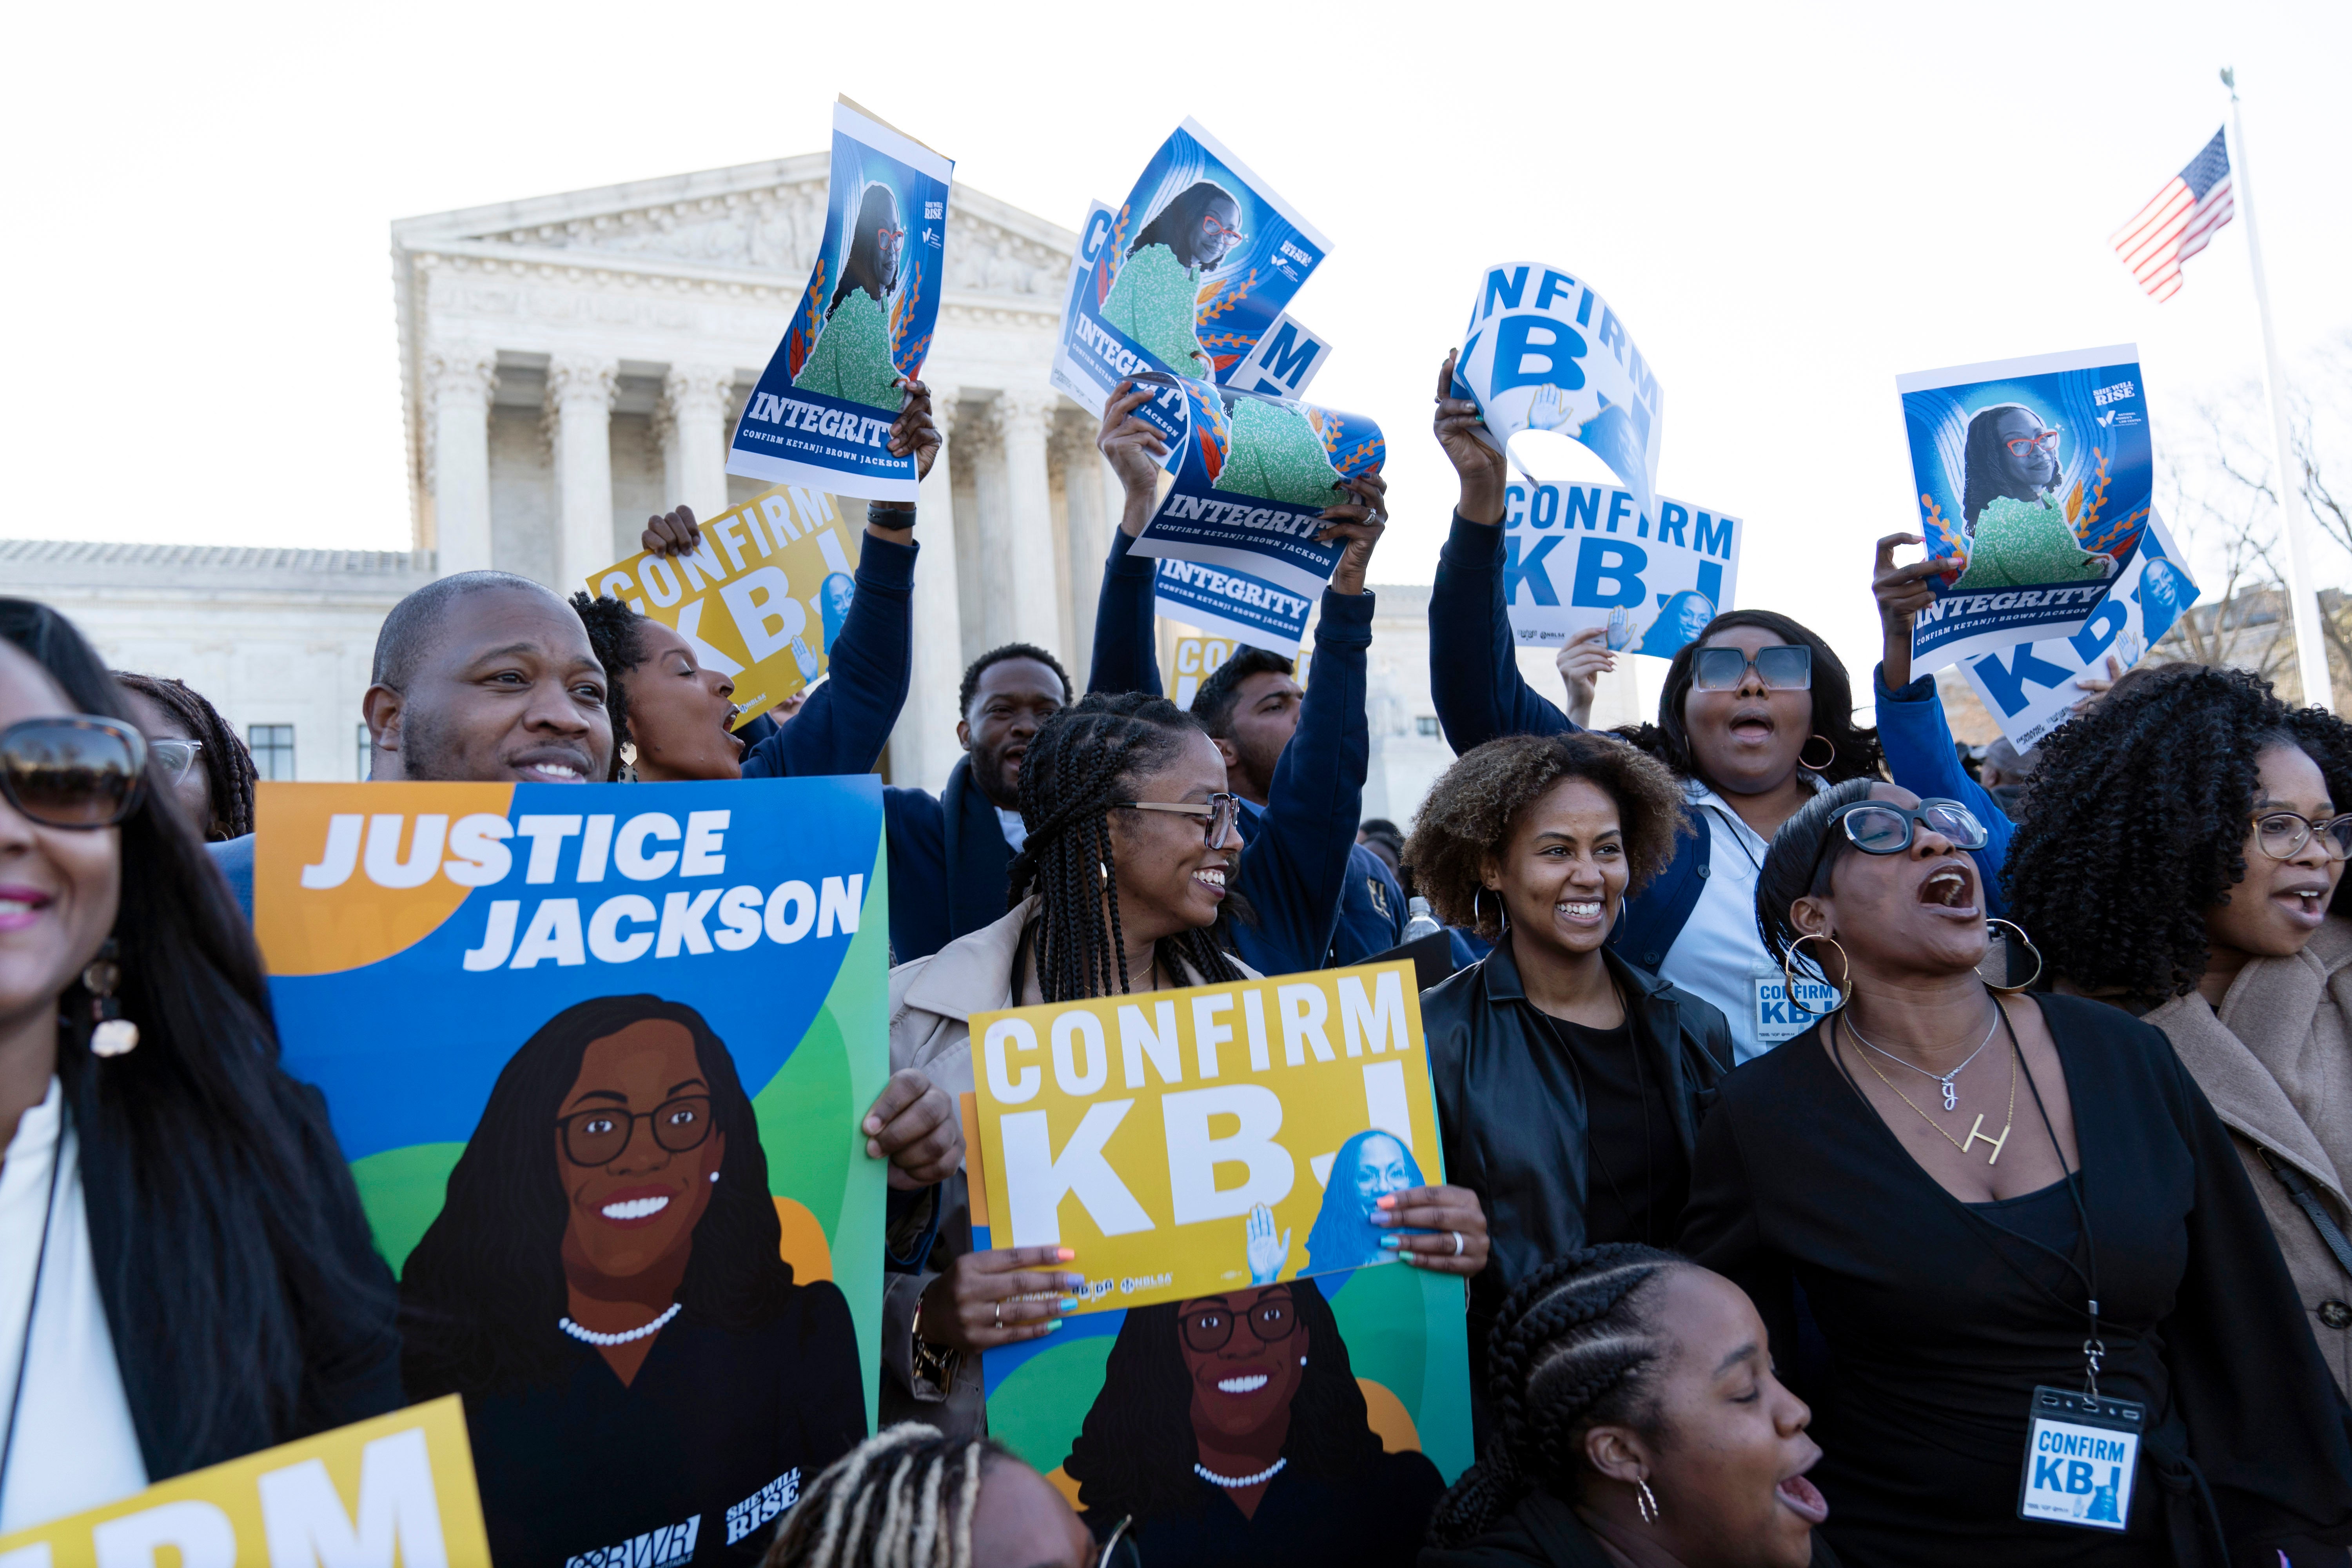 Supporters of the confirmation of Judge Ketanji Brown Jackson rally outside of the Supreme Court on Capitol Hill in Washington, Monday, March 21, 2022